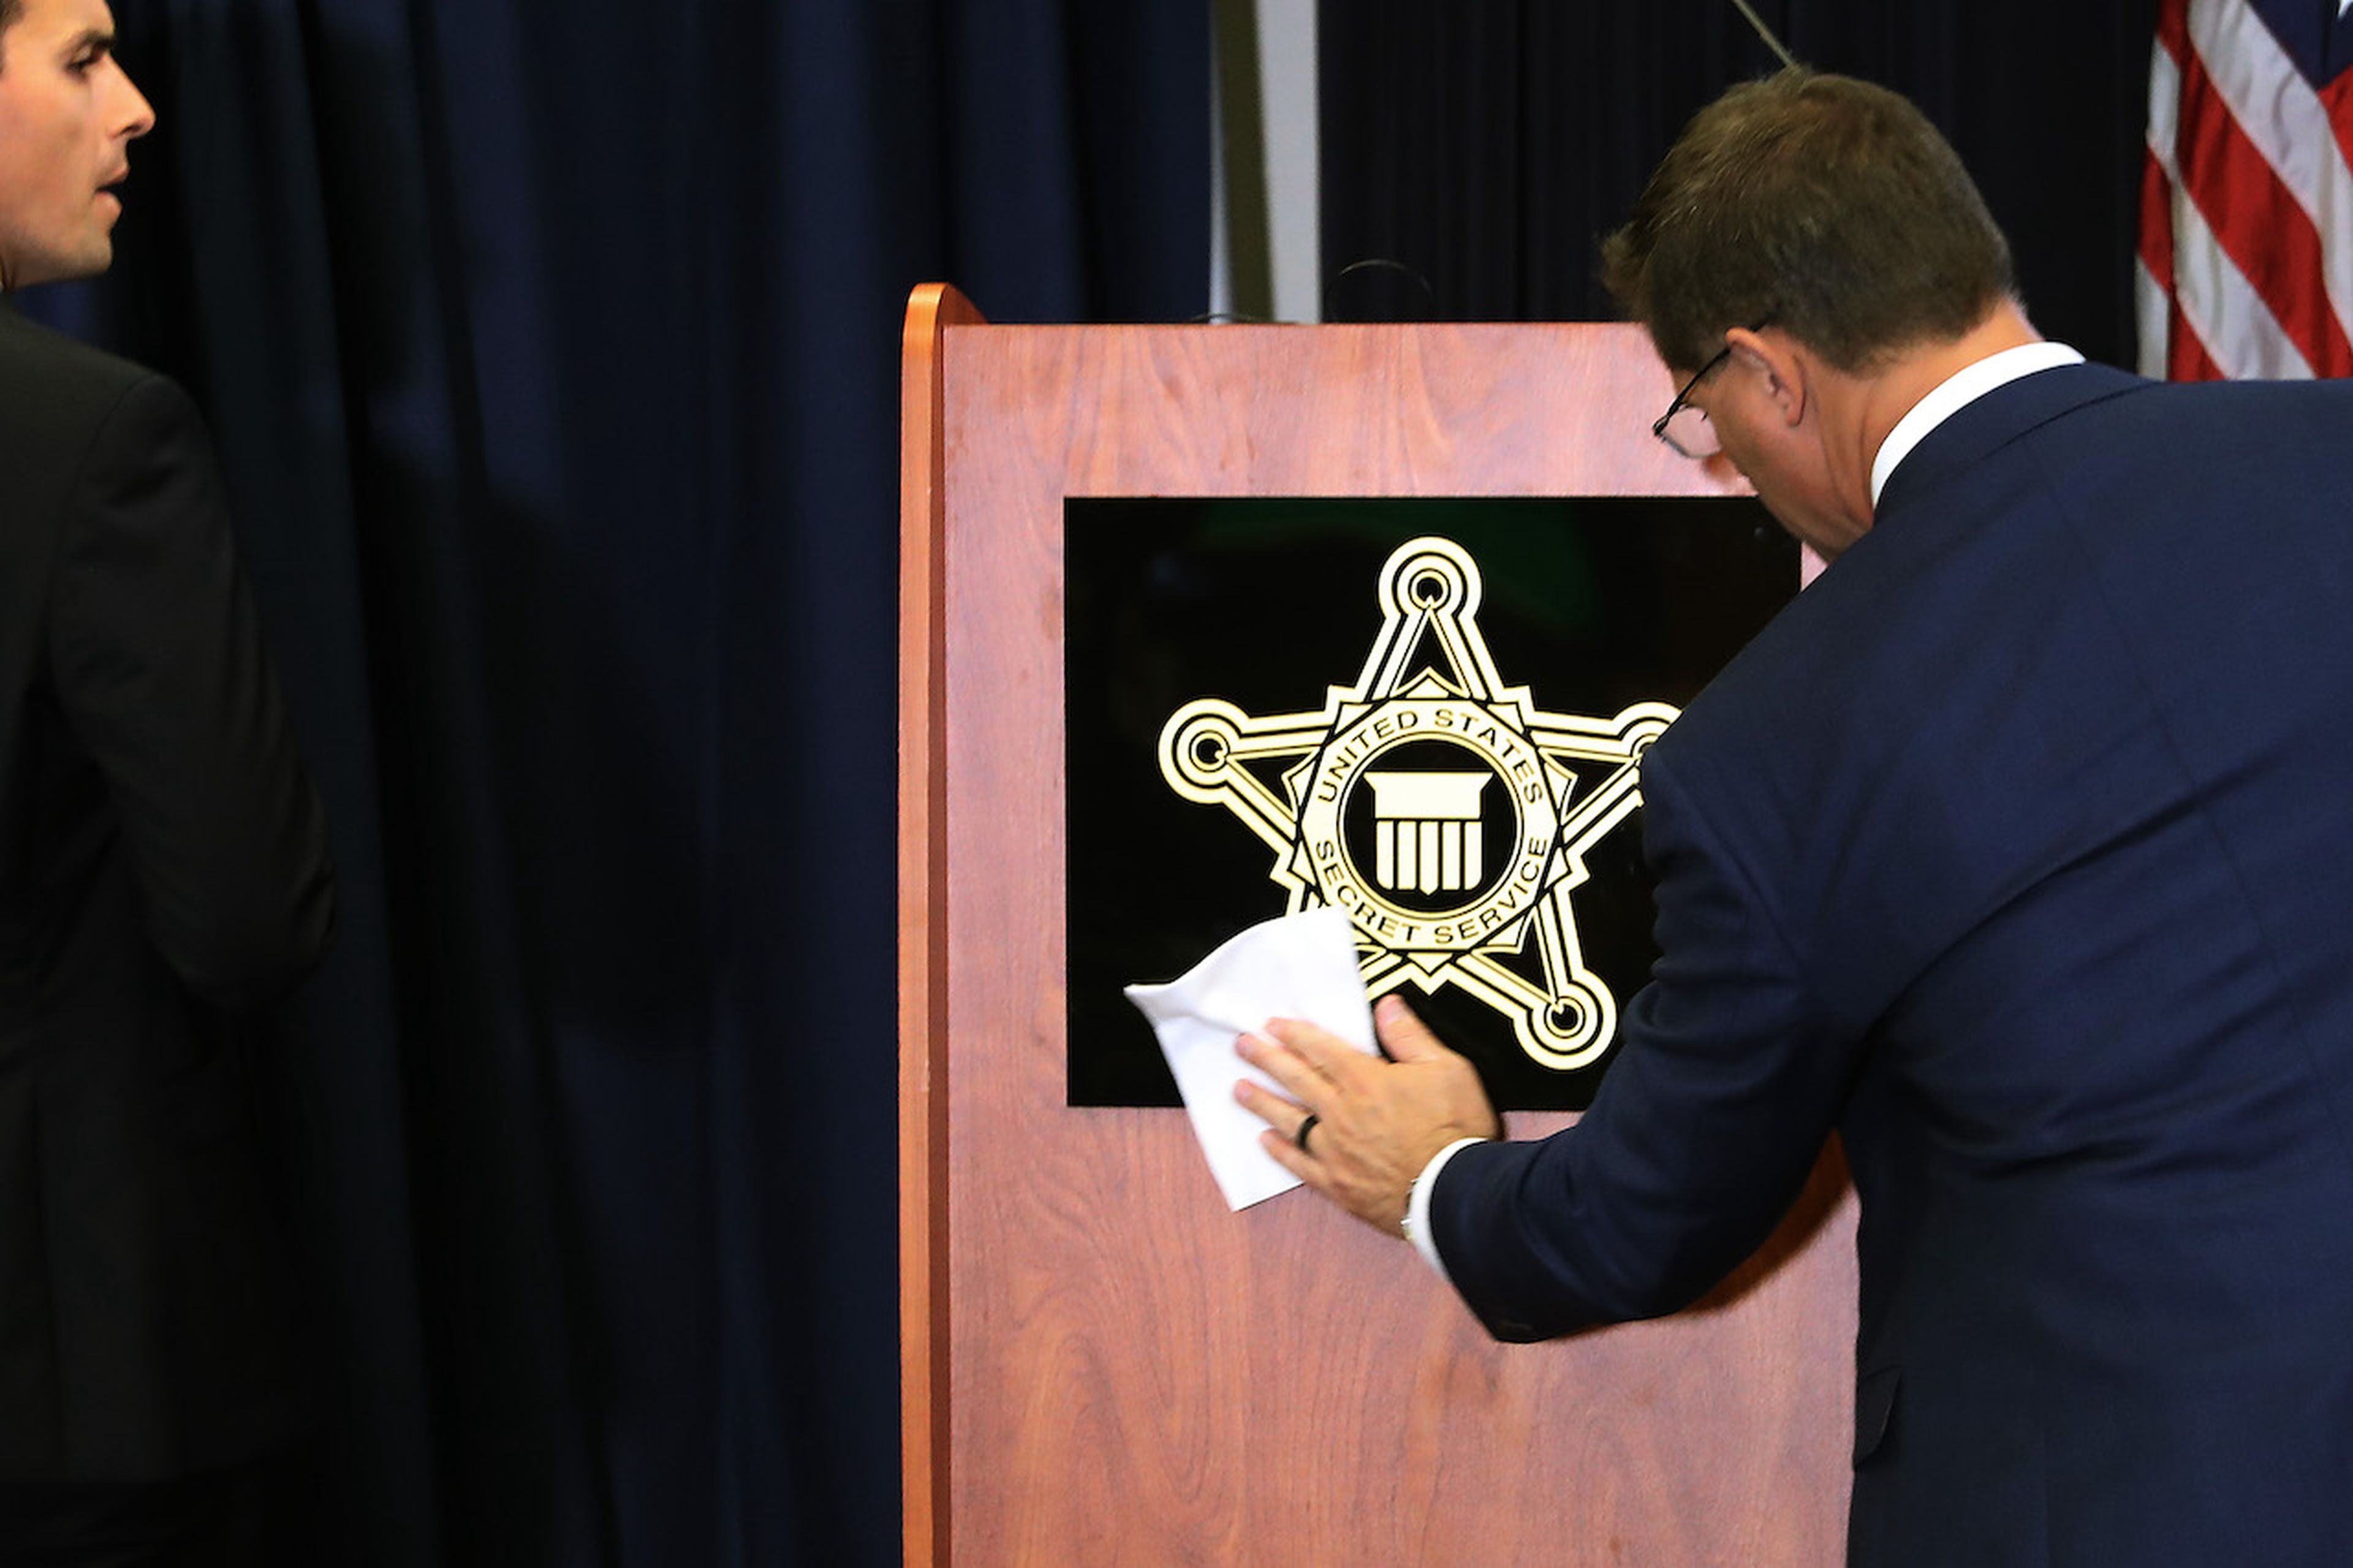 A sign with the U.S. Secret Service shield is cleaned before a briefing in 2019 in Washington, D.C. The Secret Service and U.S. Postal Service opened an investigation into a wide-ranging scheme to defraud businesses in August. (Photo by Chip Somodevilla/Getty Images)